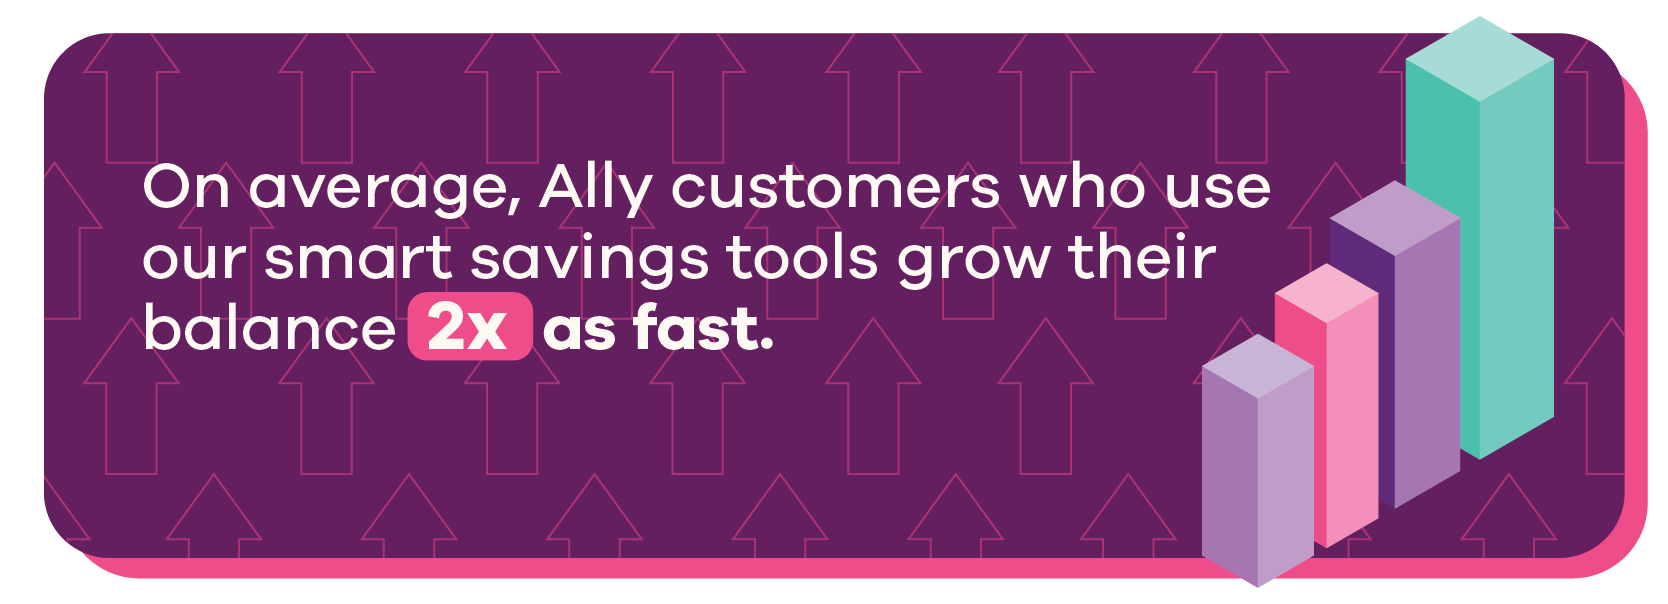 Illustration of a 3-D bar graph with text overlay: On average, Ally customers who use our smart savings tools grow their balance 2x as fast.